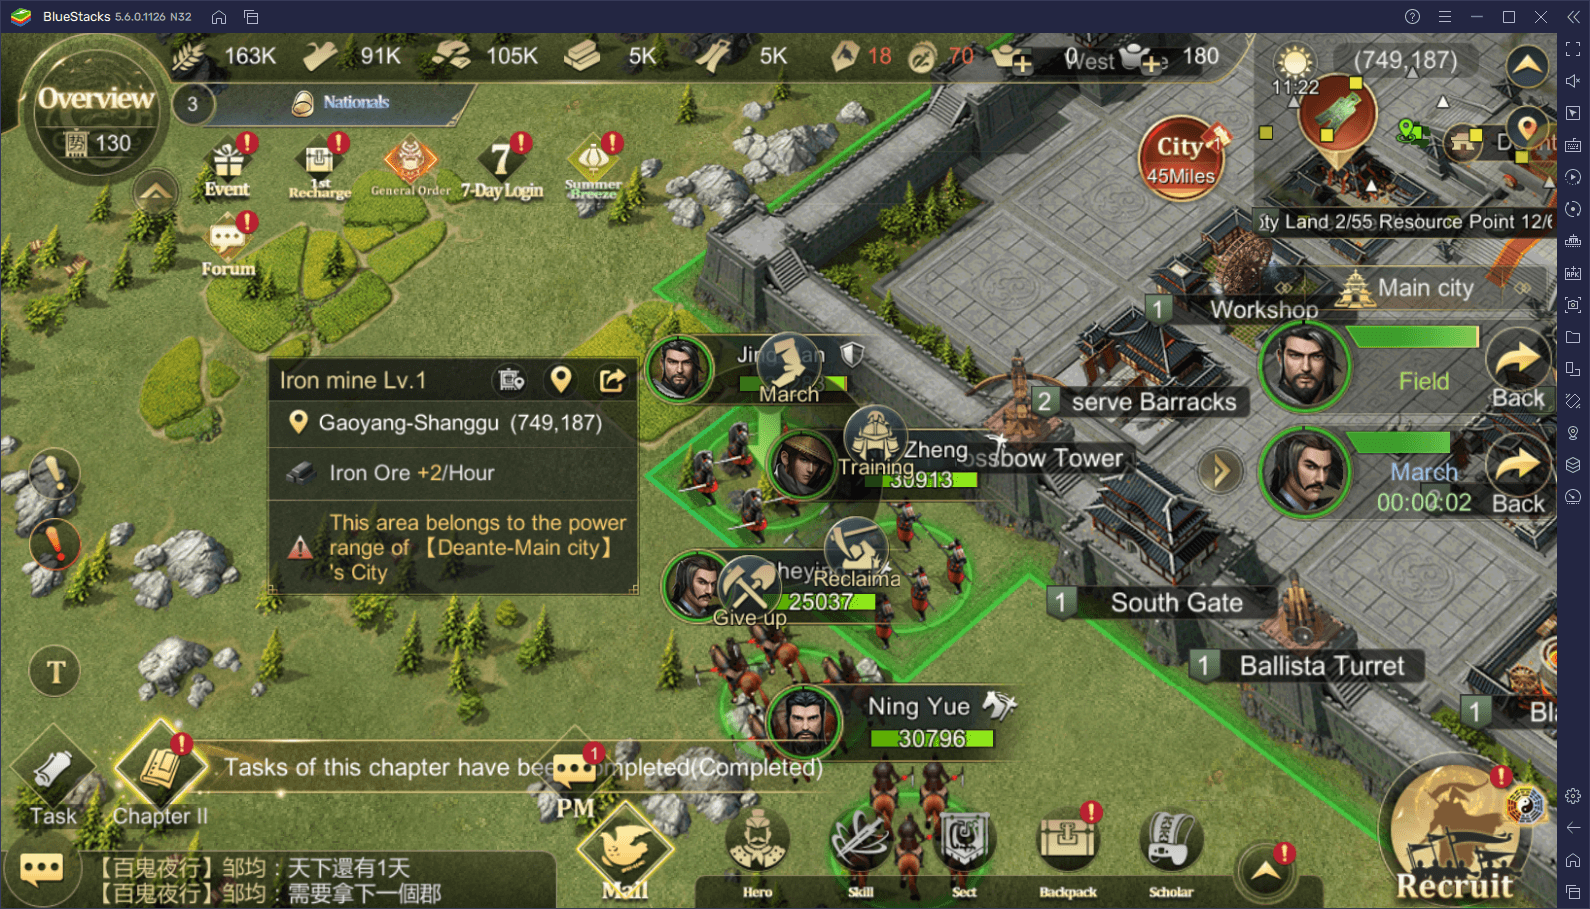 The Qin Empire Tips and Tricks for Developing Your Cities and Progressing Quickly